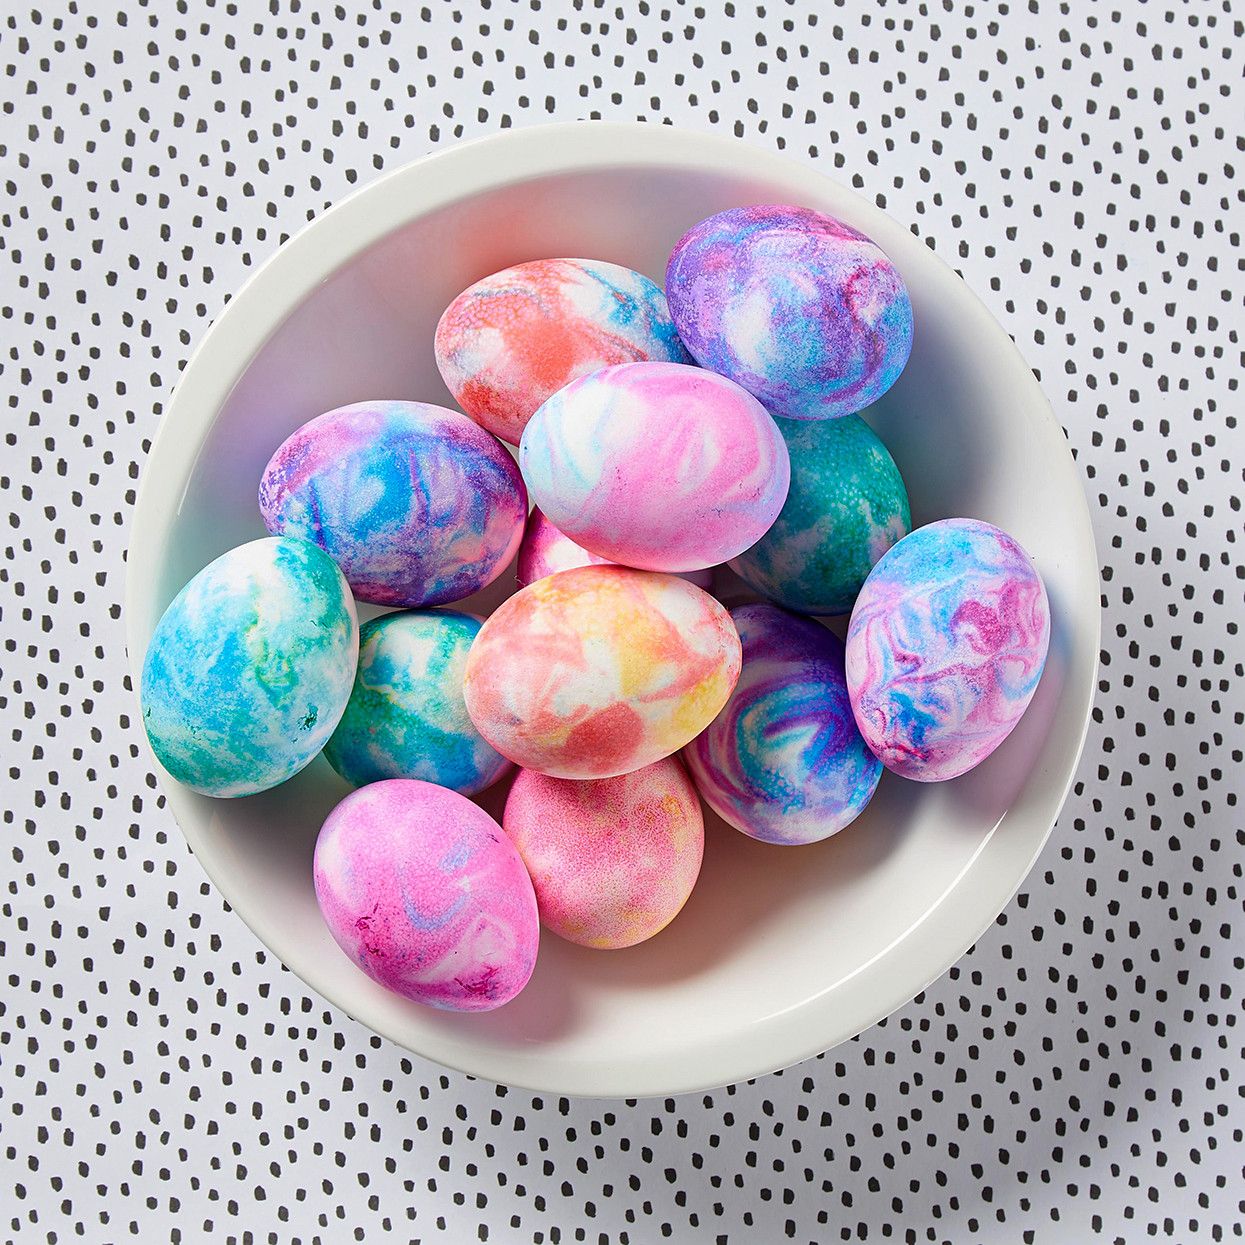 Coloring Easter Egg Ideas
 43 Creative Ways to Dye Easter Eggs